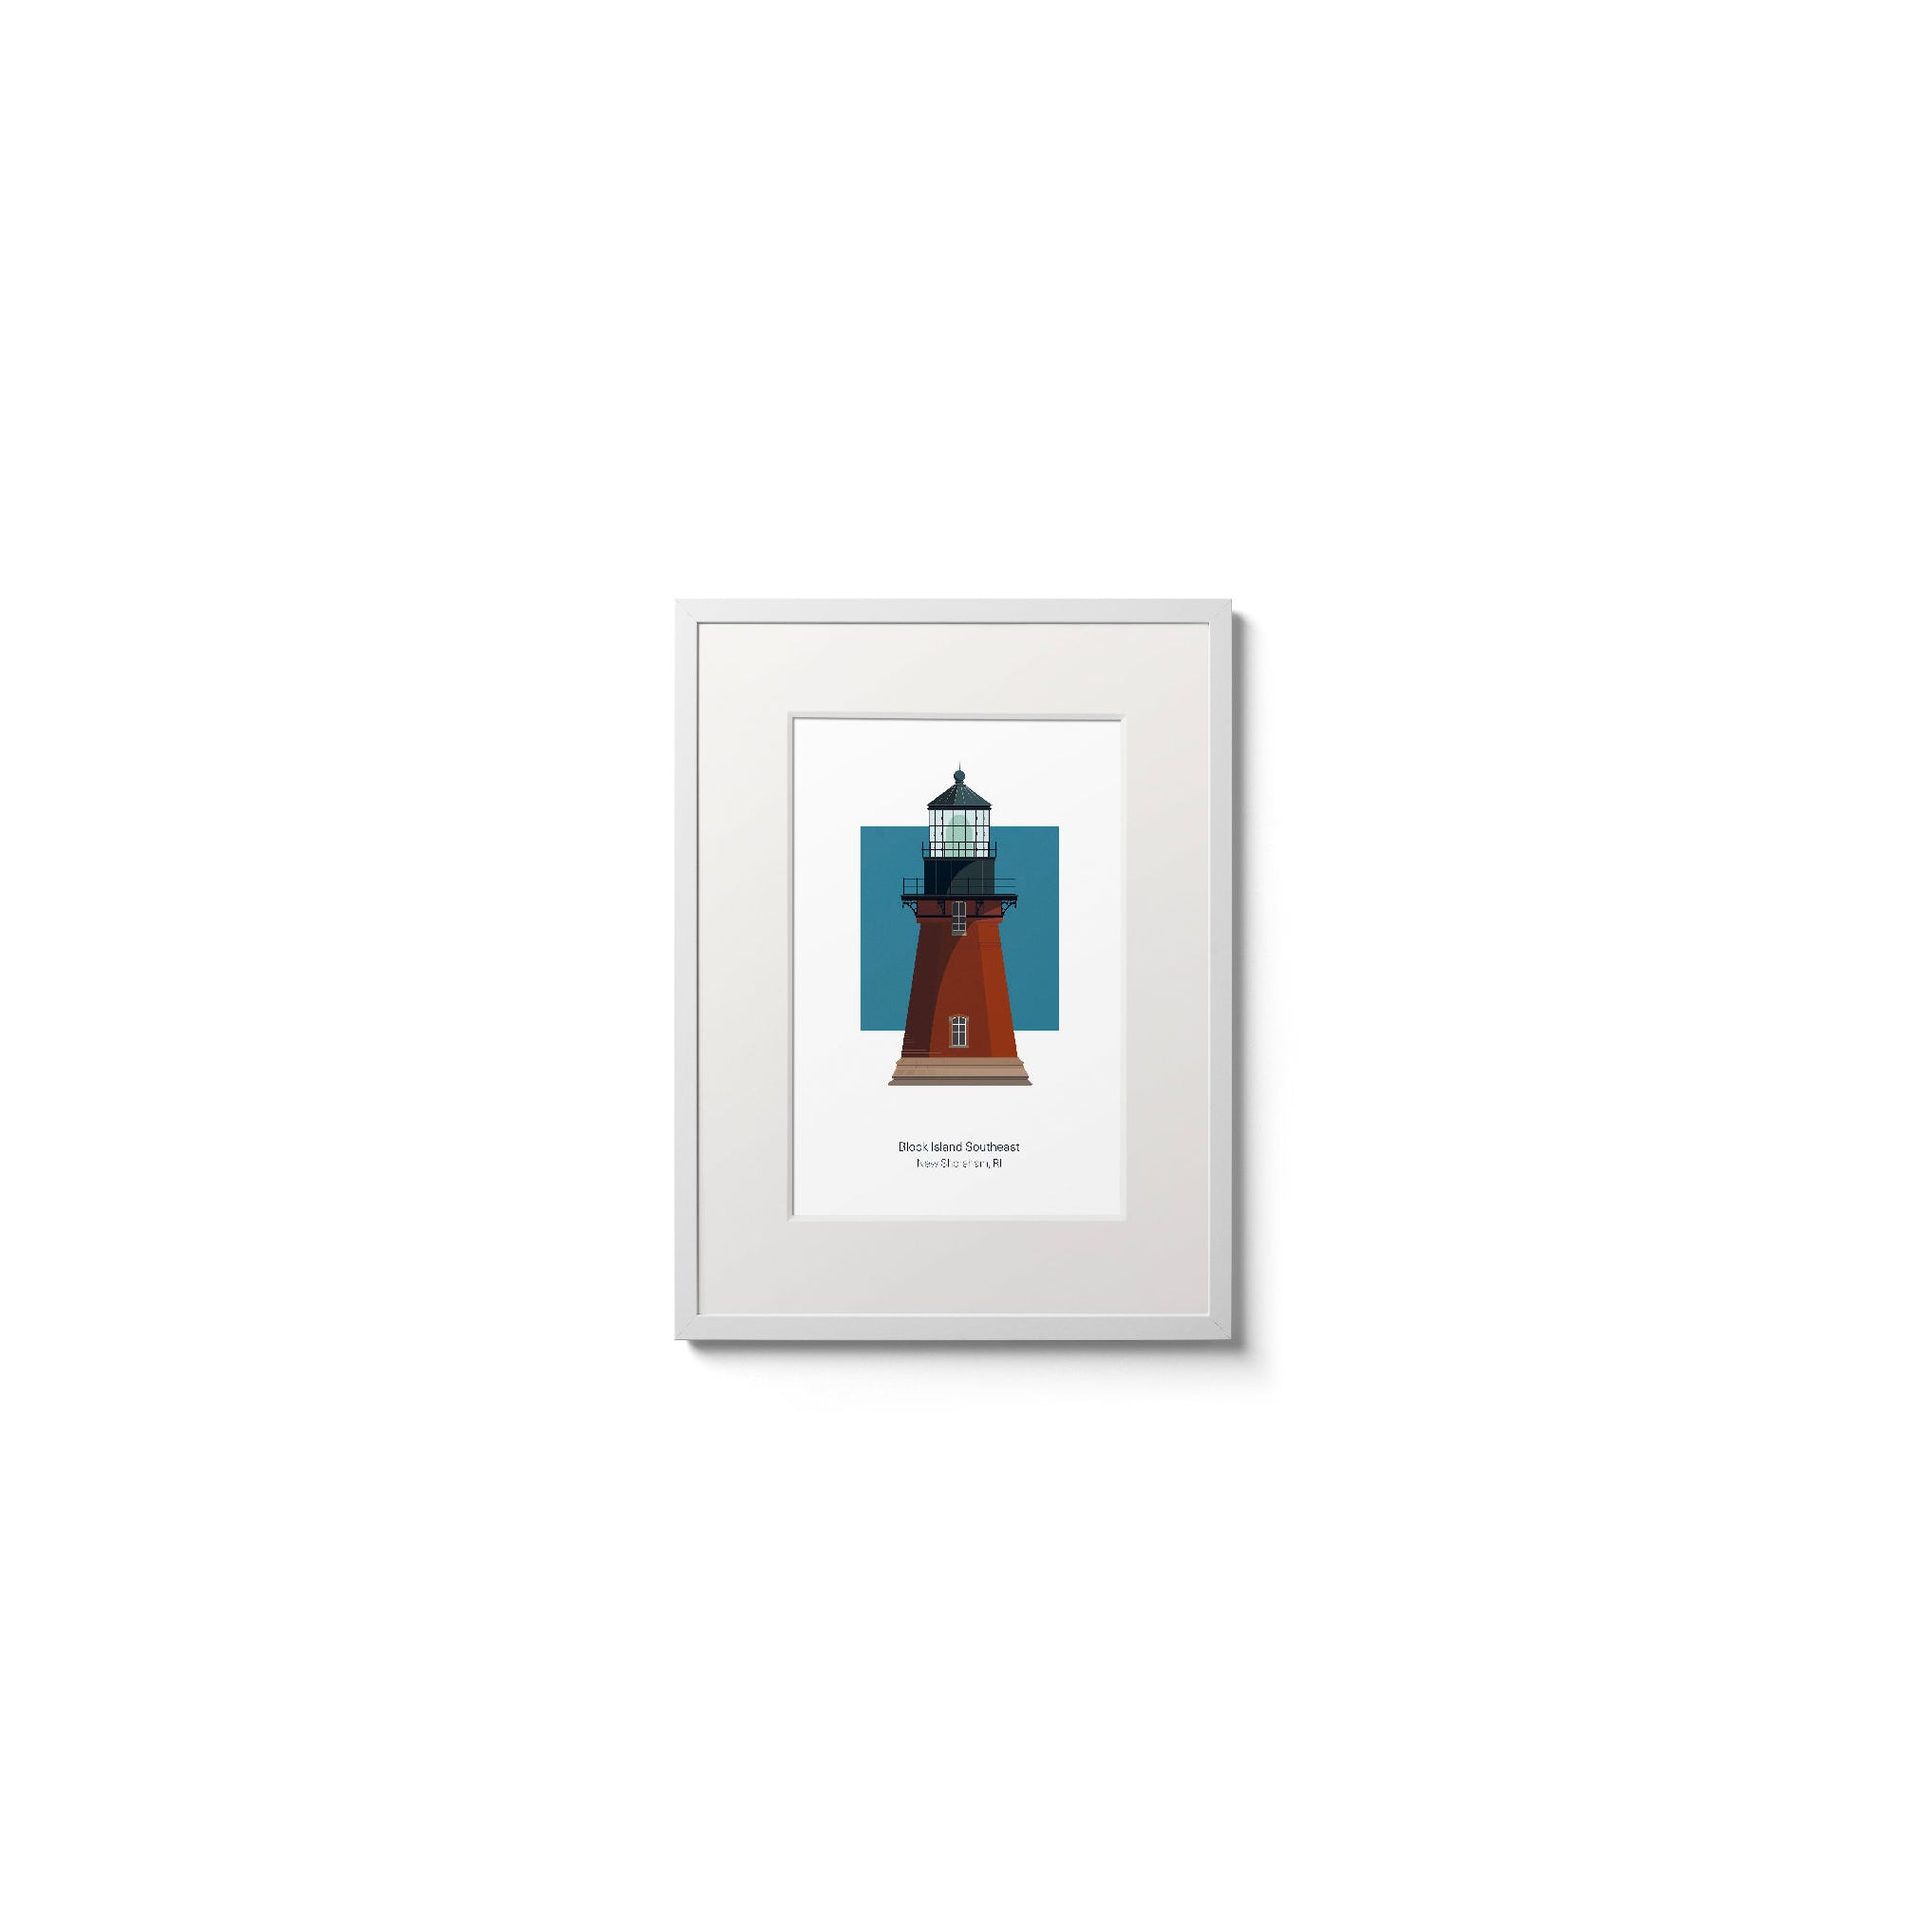 Illustration of the Block Island Southeast lighthouse, Rhode Island, USA. On a white background with aqua blue square as a backdrop., in a white frame  and measuring 6"x8" (15x20cm).